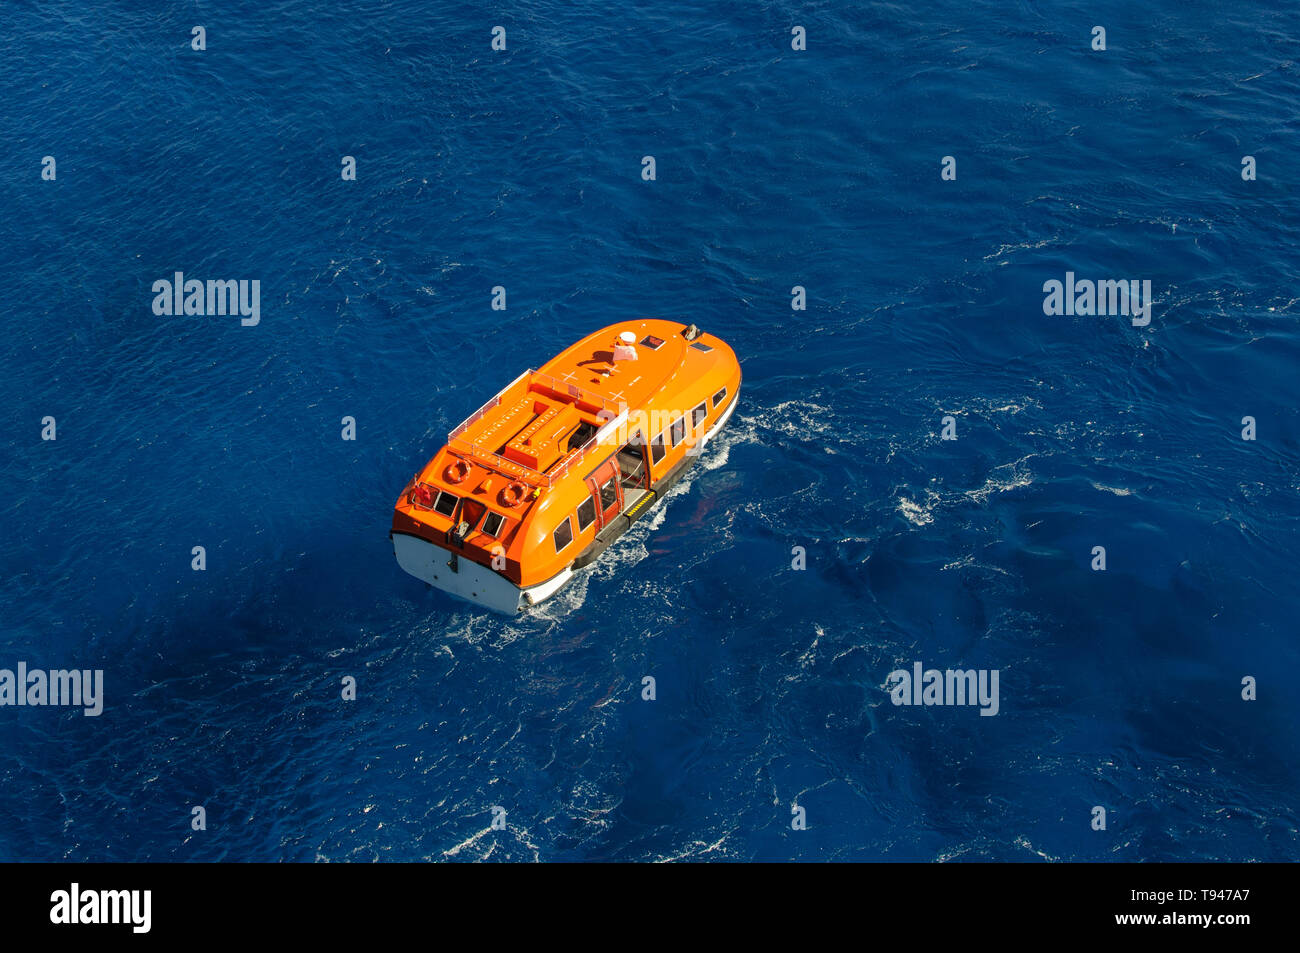 Orange rescue boat on blue sea waves background. Aerial view Stock Photo